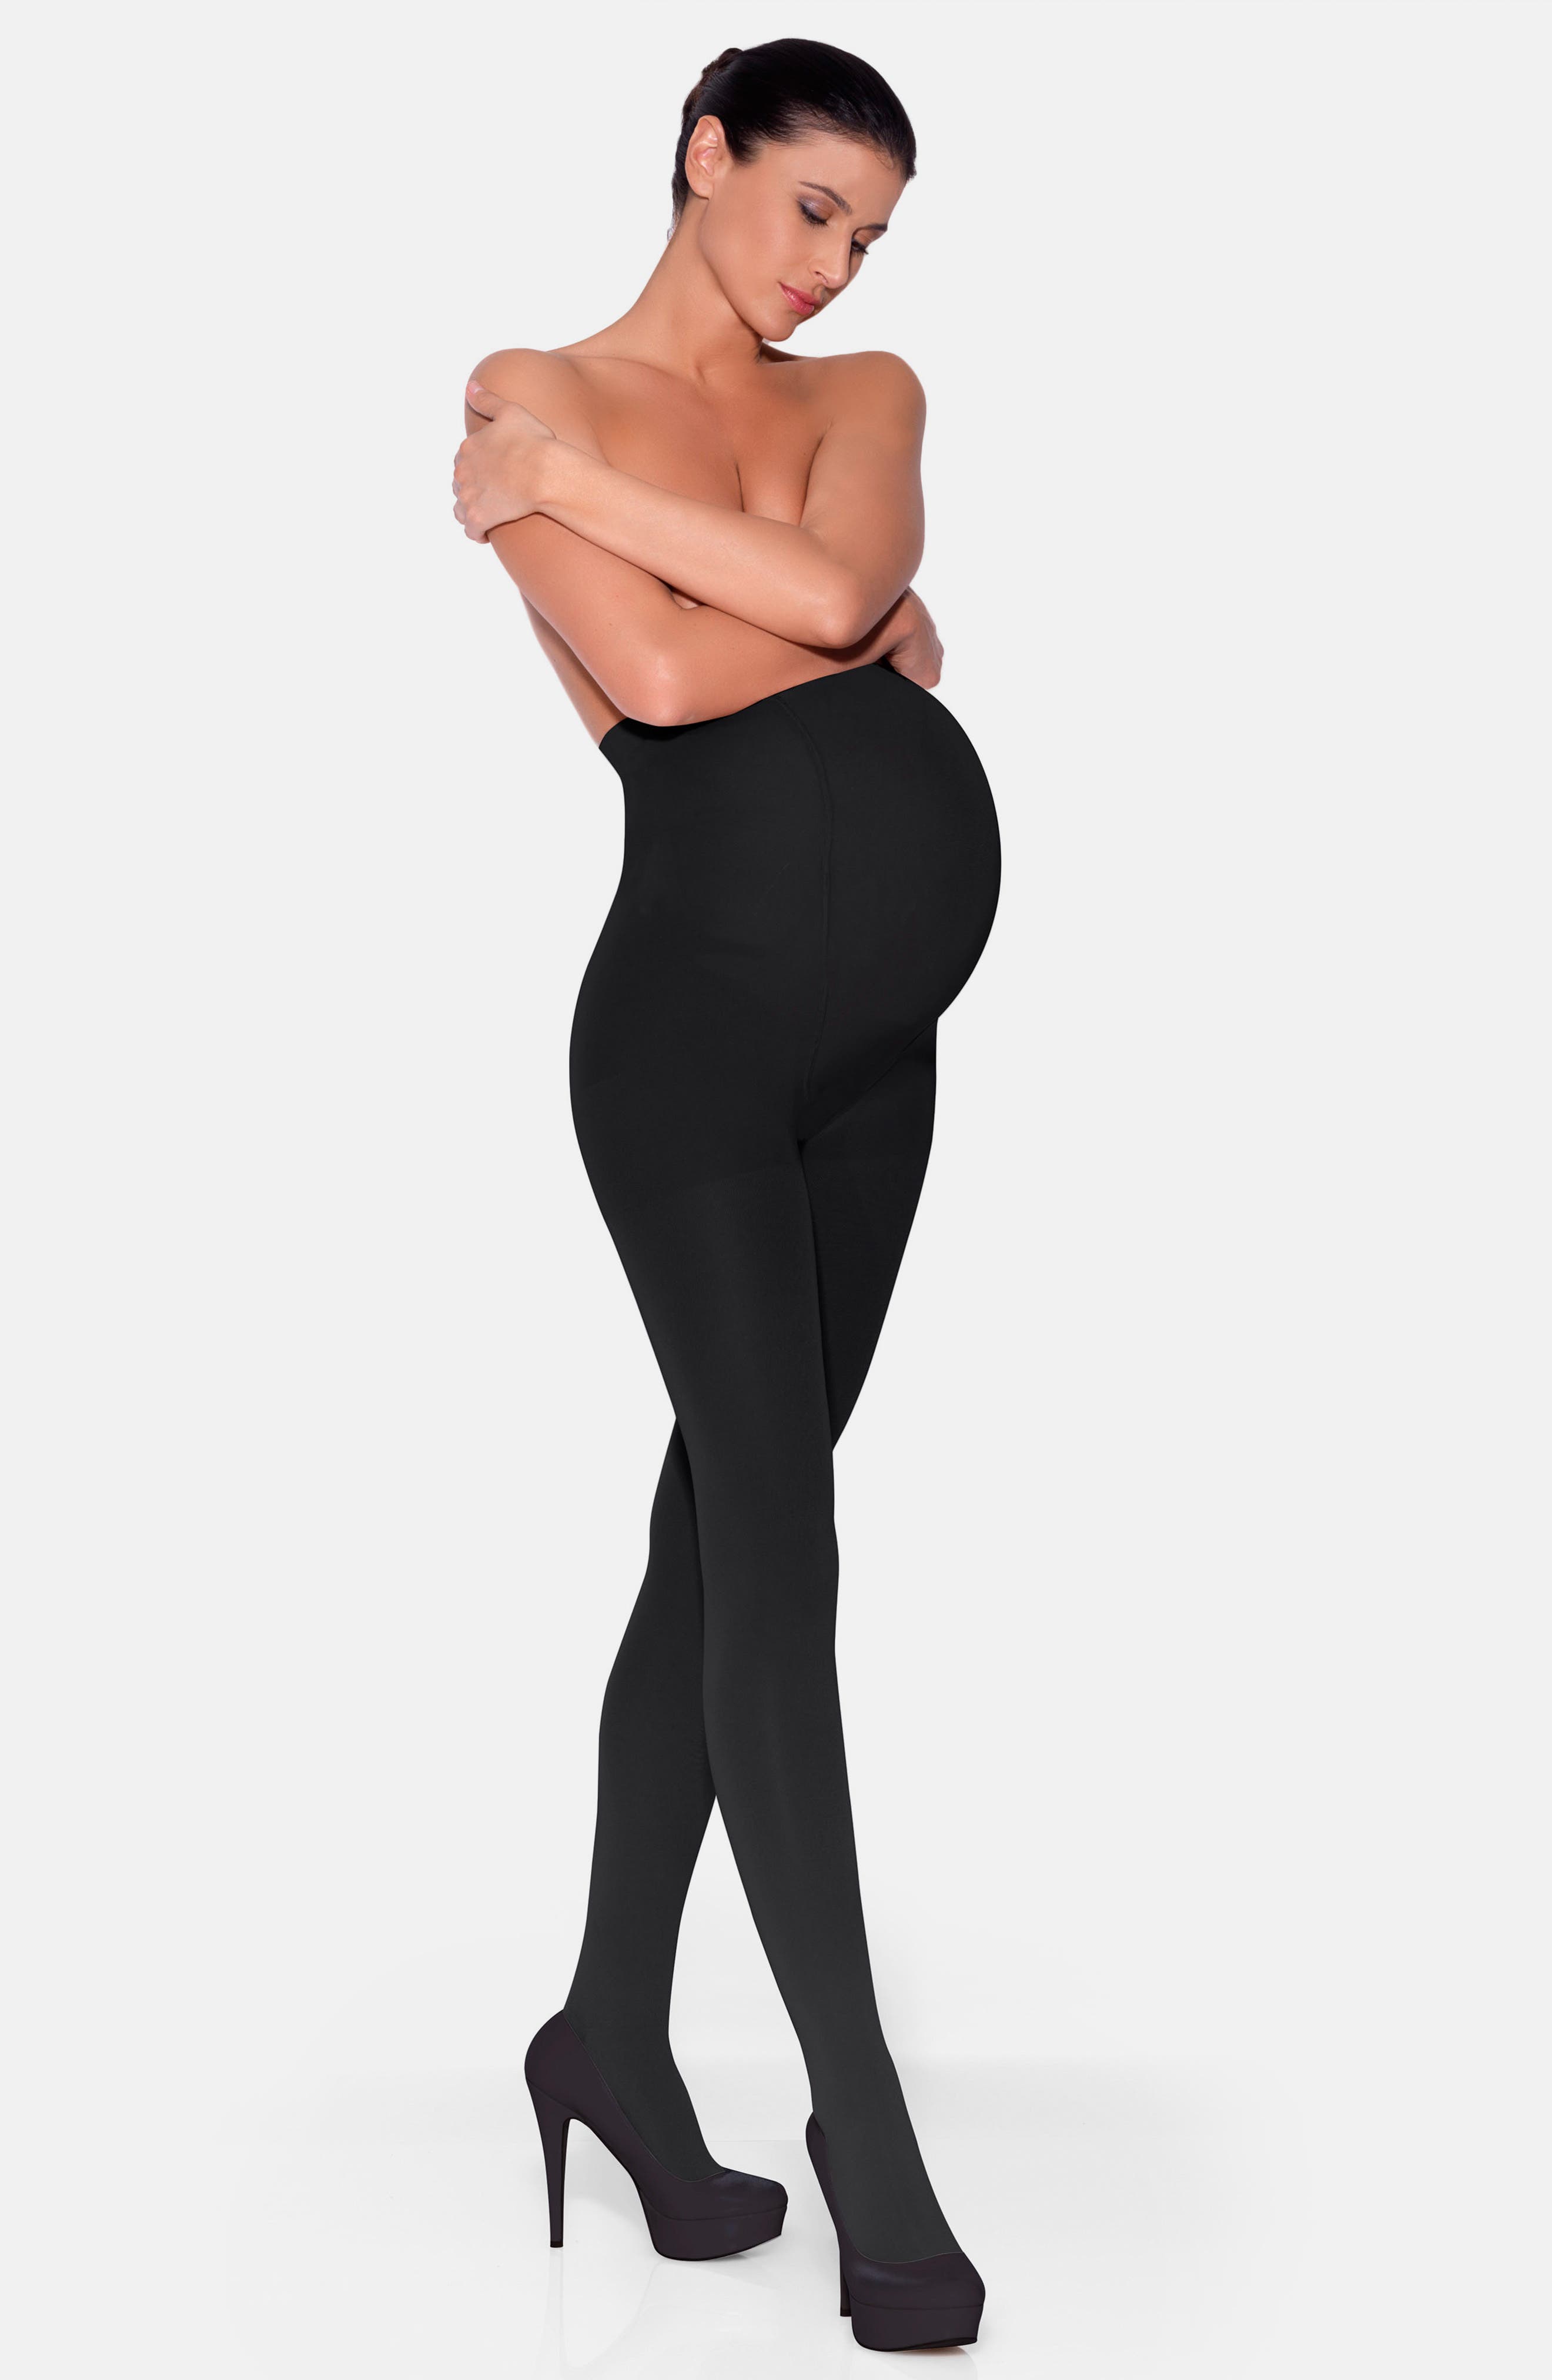 UPC 745129221904 product image for Women's Insignia By Sigvaris Graduated Compression Maternity Tights | upcitemdb.com